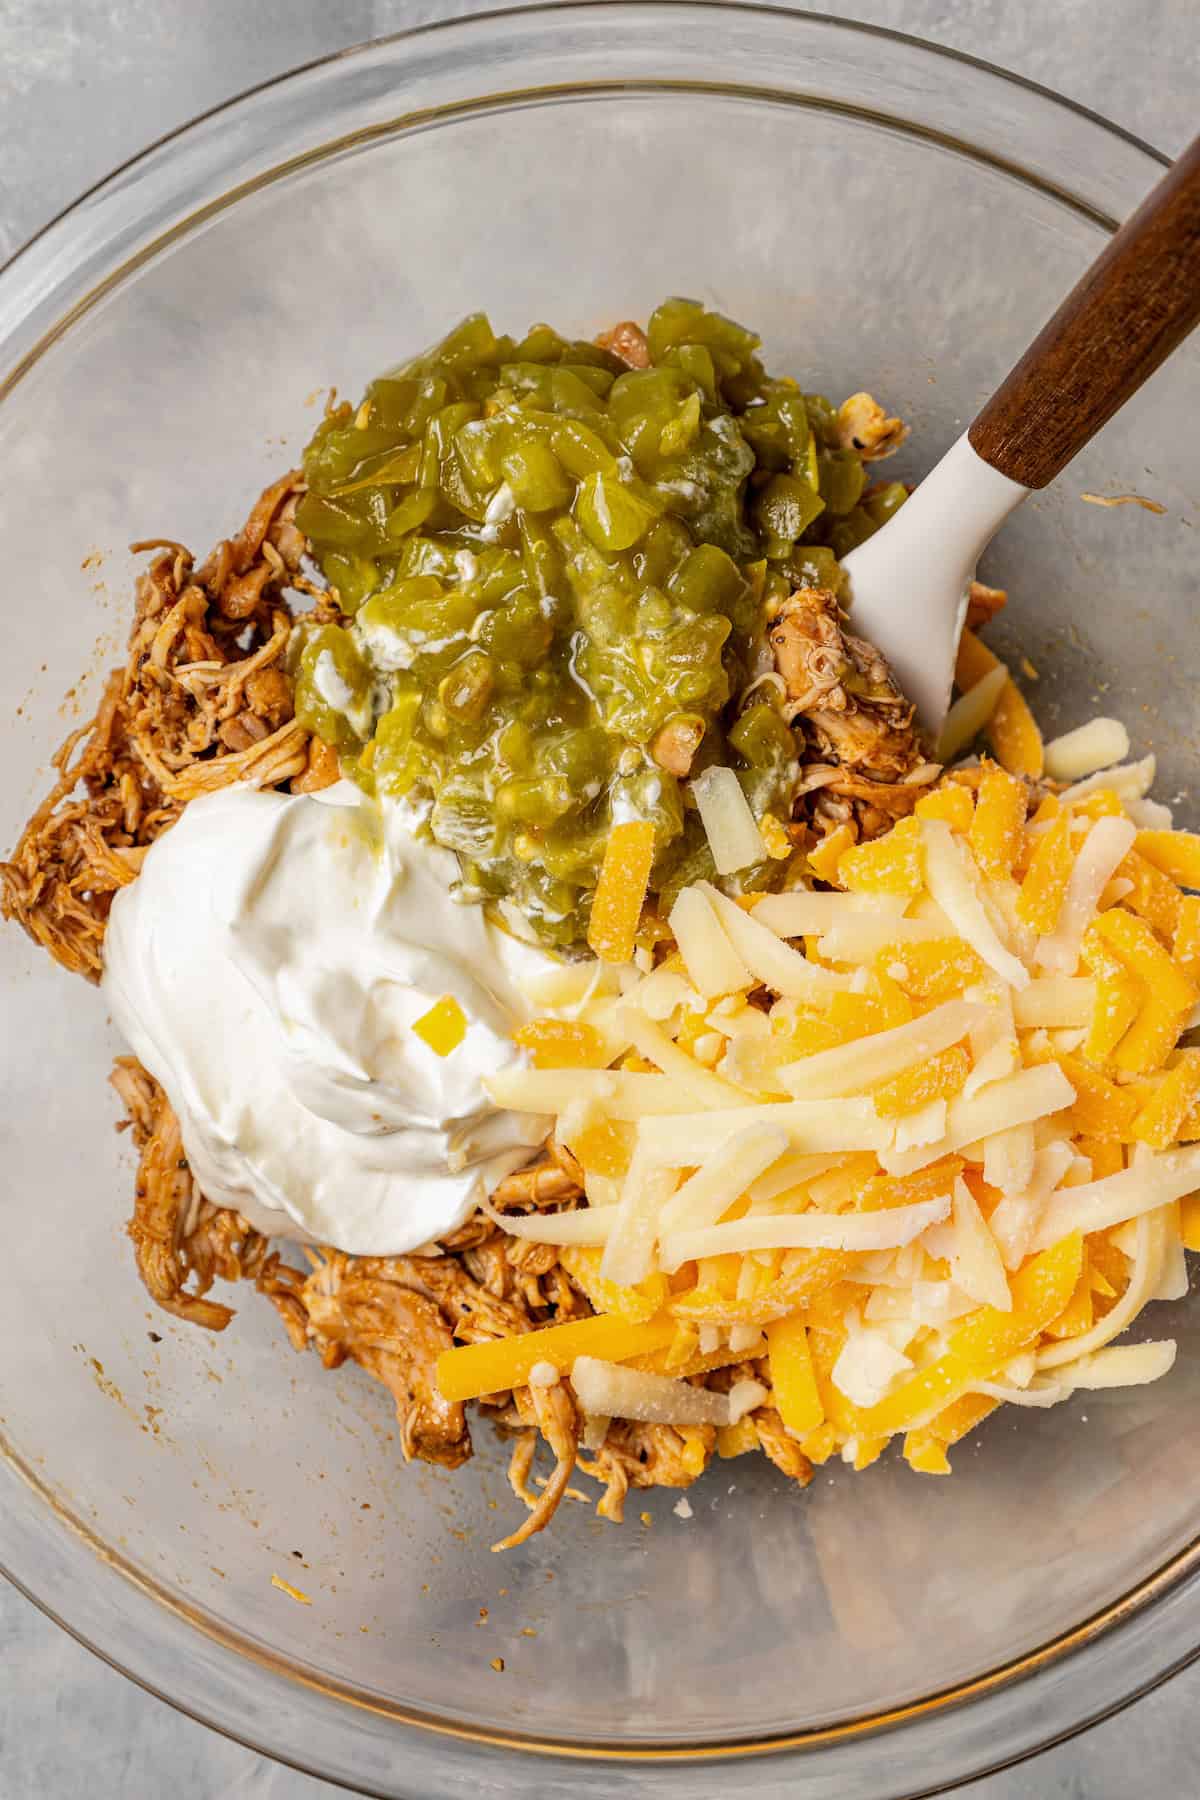 Green chili chicken enchilada filling ingredients combined in a glass bowl with a spatula for stirring.